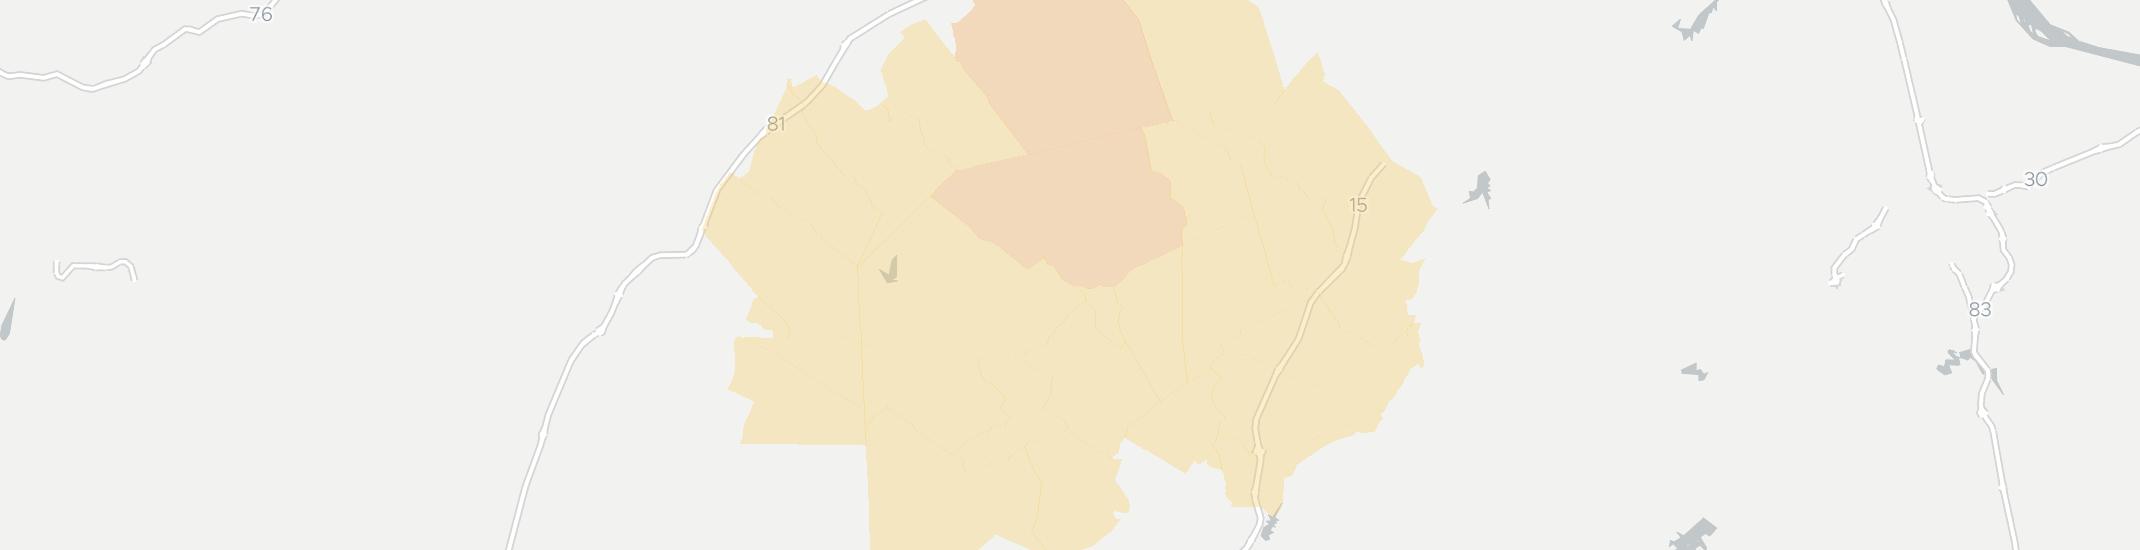 Biglerville Internet Competition Map. Click for interactive map